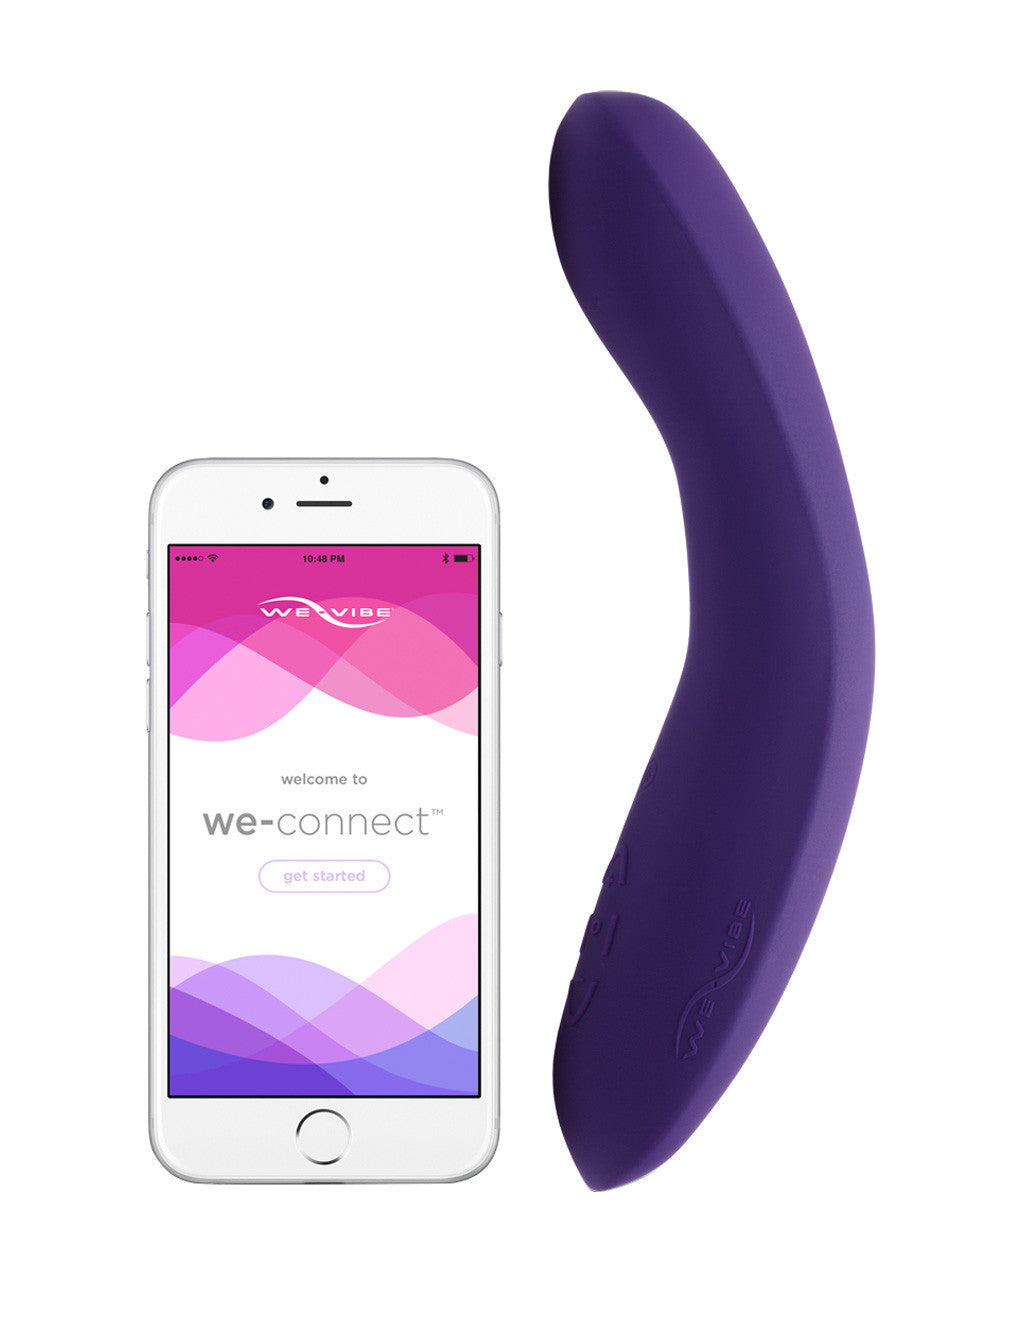 we-vibe rave gspot vibrator with app